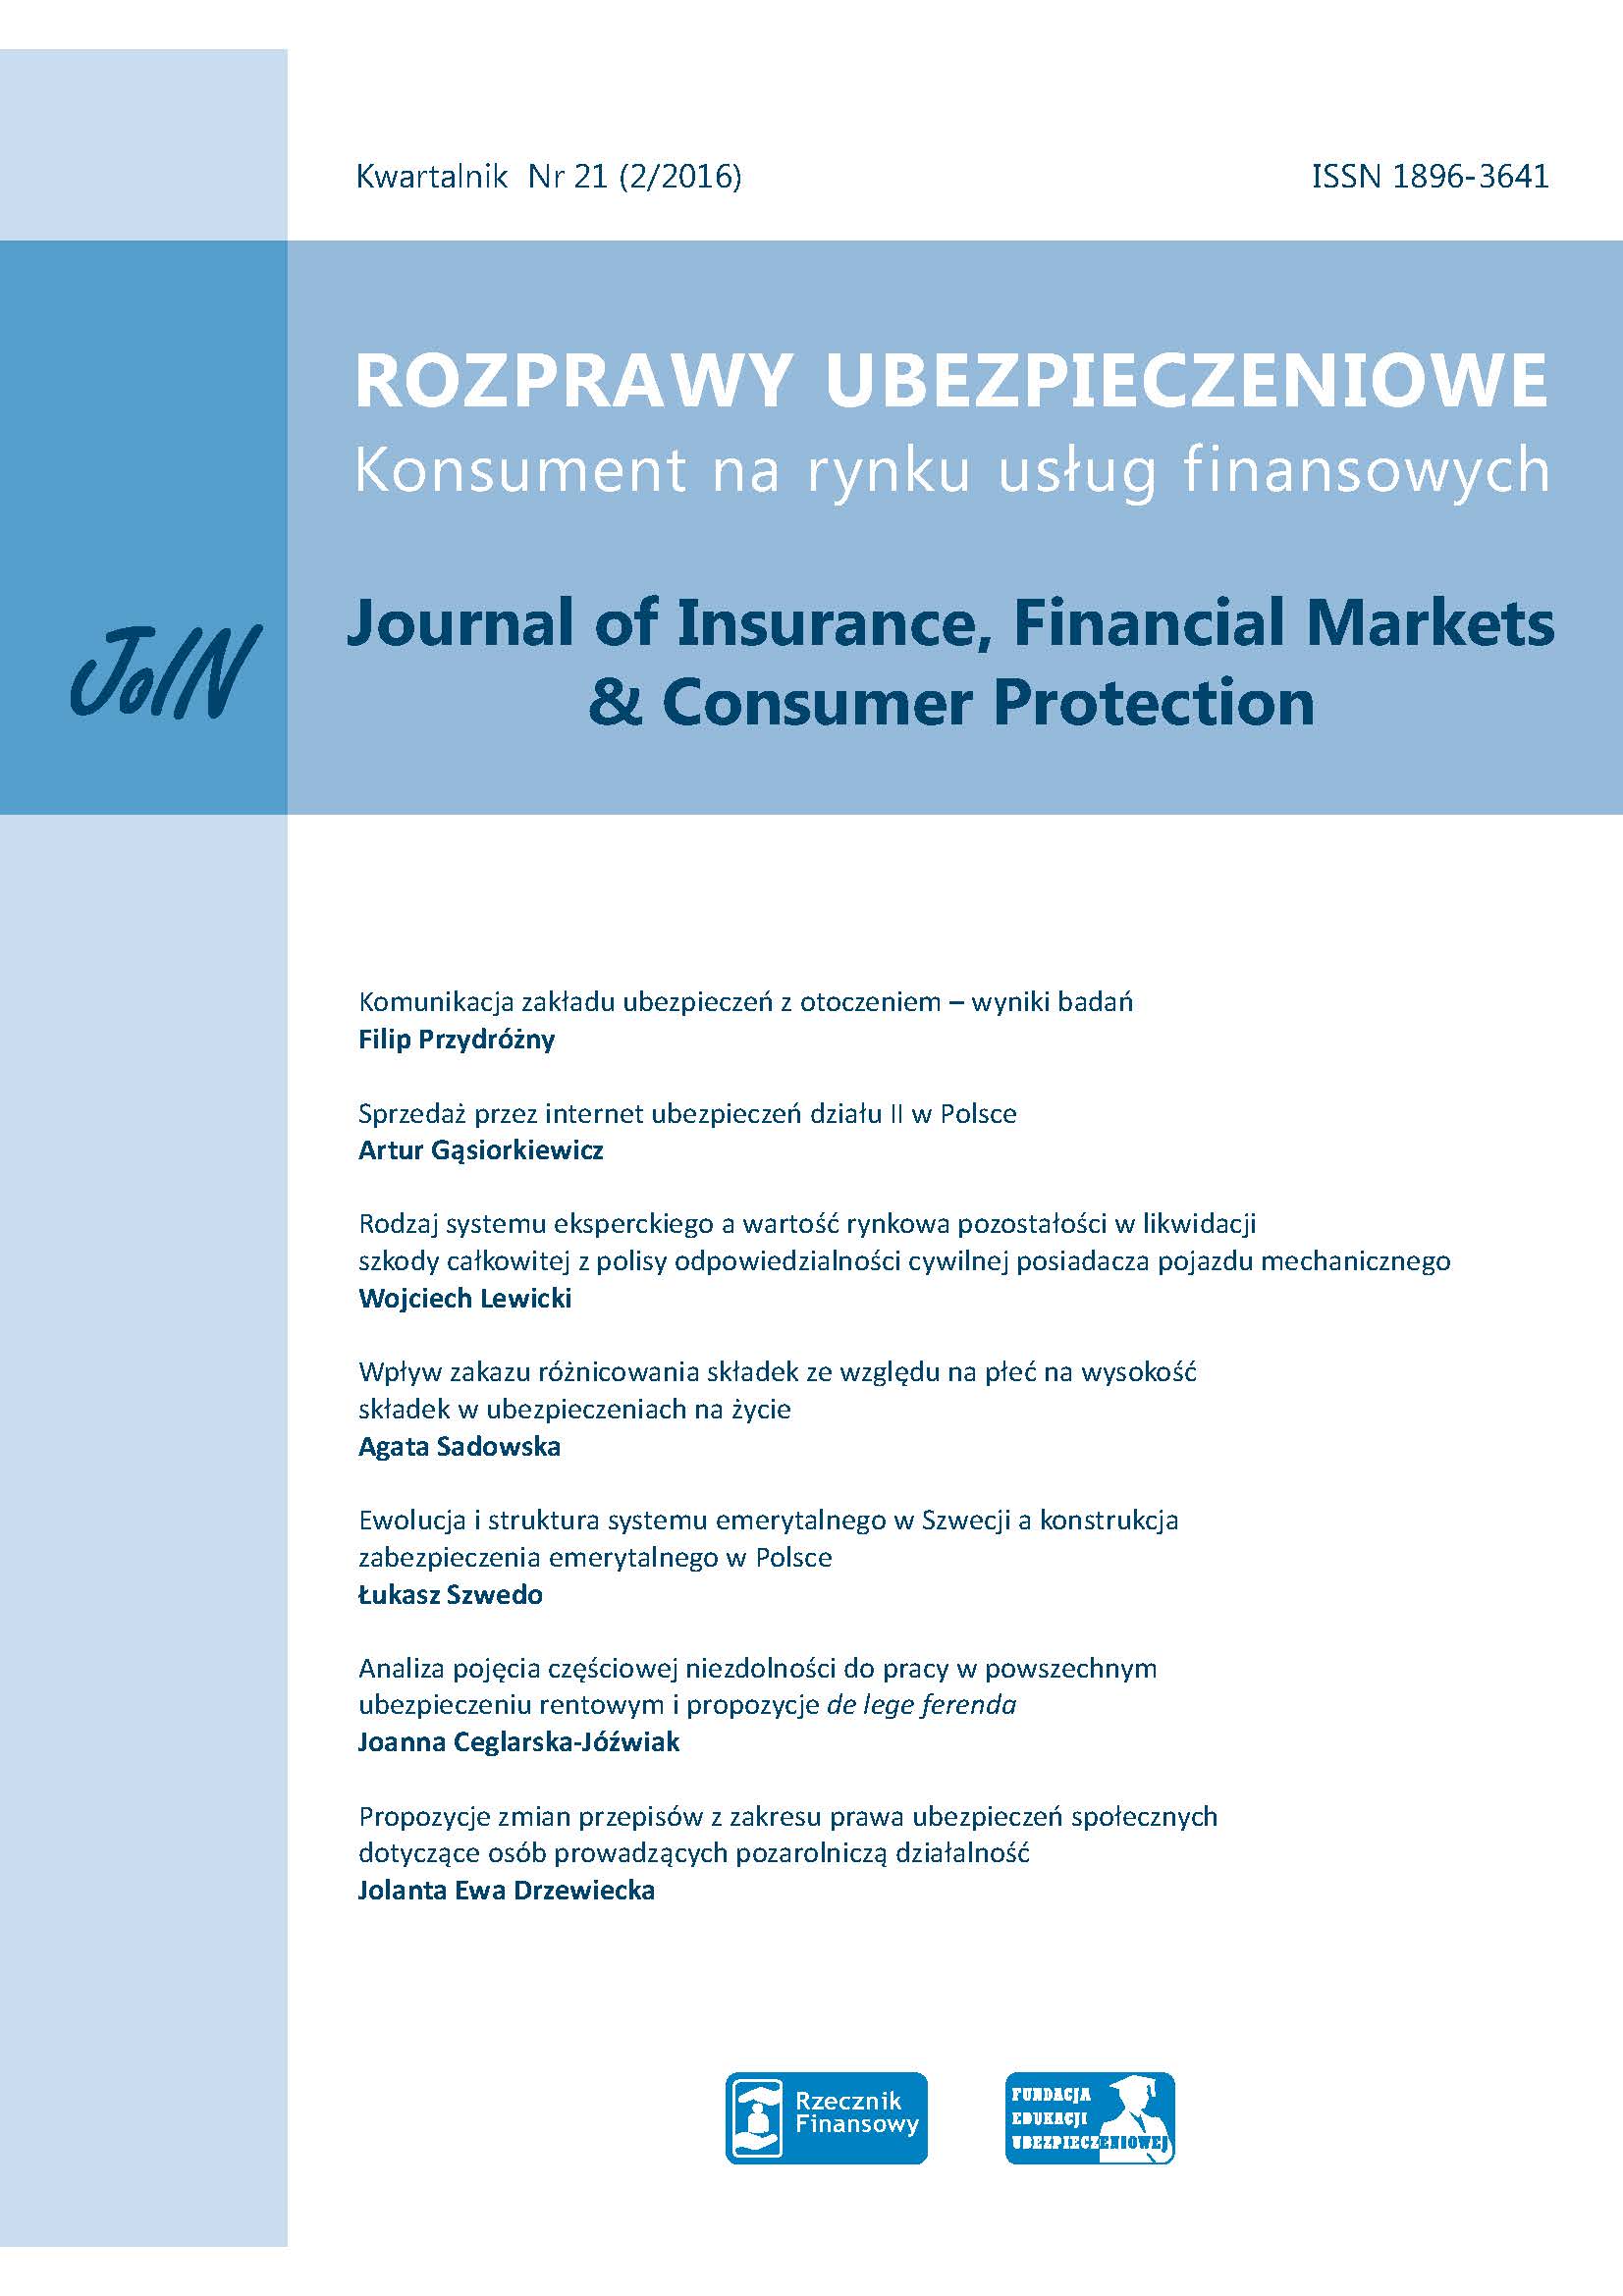 Influence of interdict on gender differentiation of insurance premium rates on premium rates in life insurance Cover Image